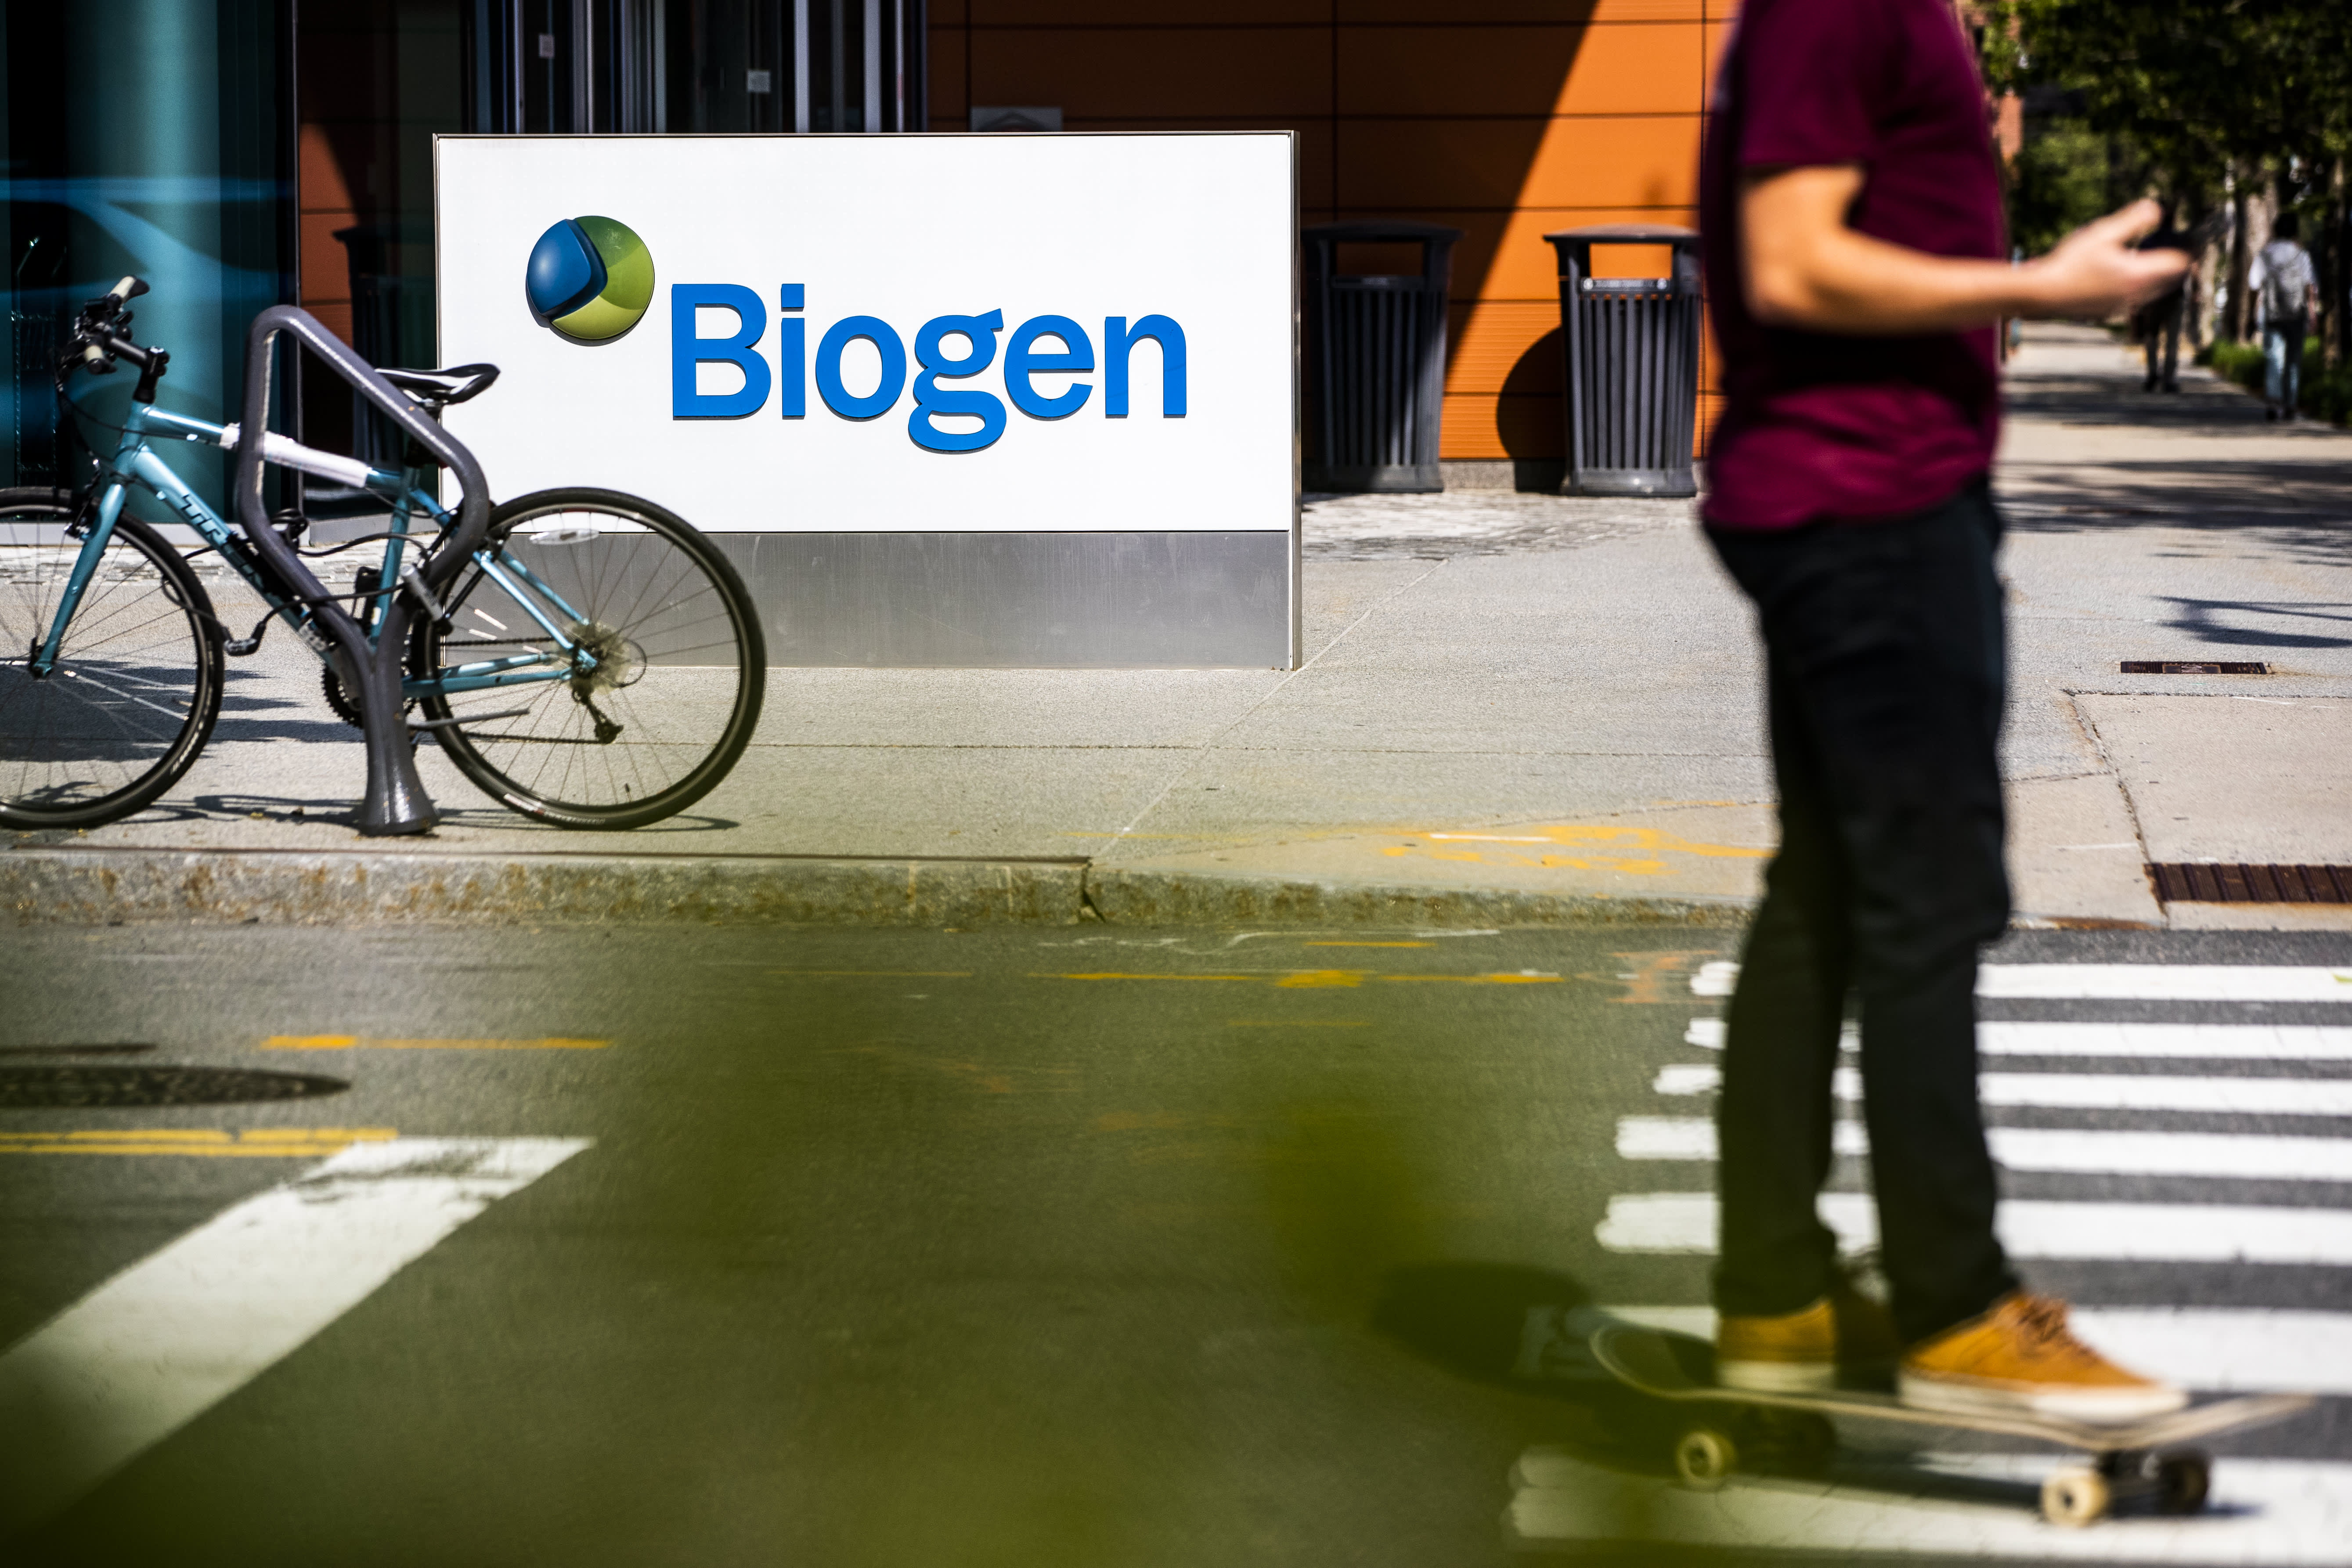 Biogen faces tough questions on $56K-a-year price of new Alzheimer's drug